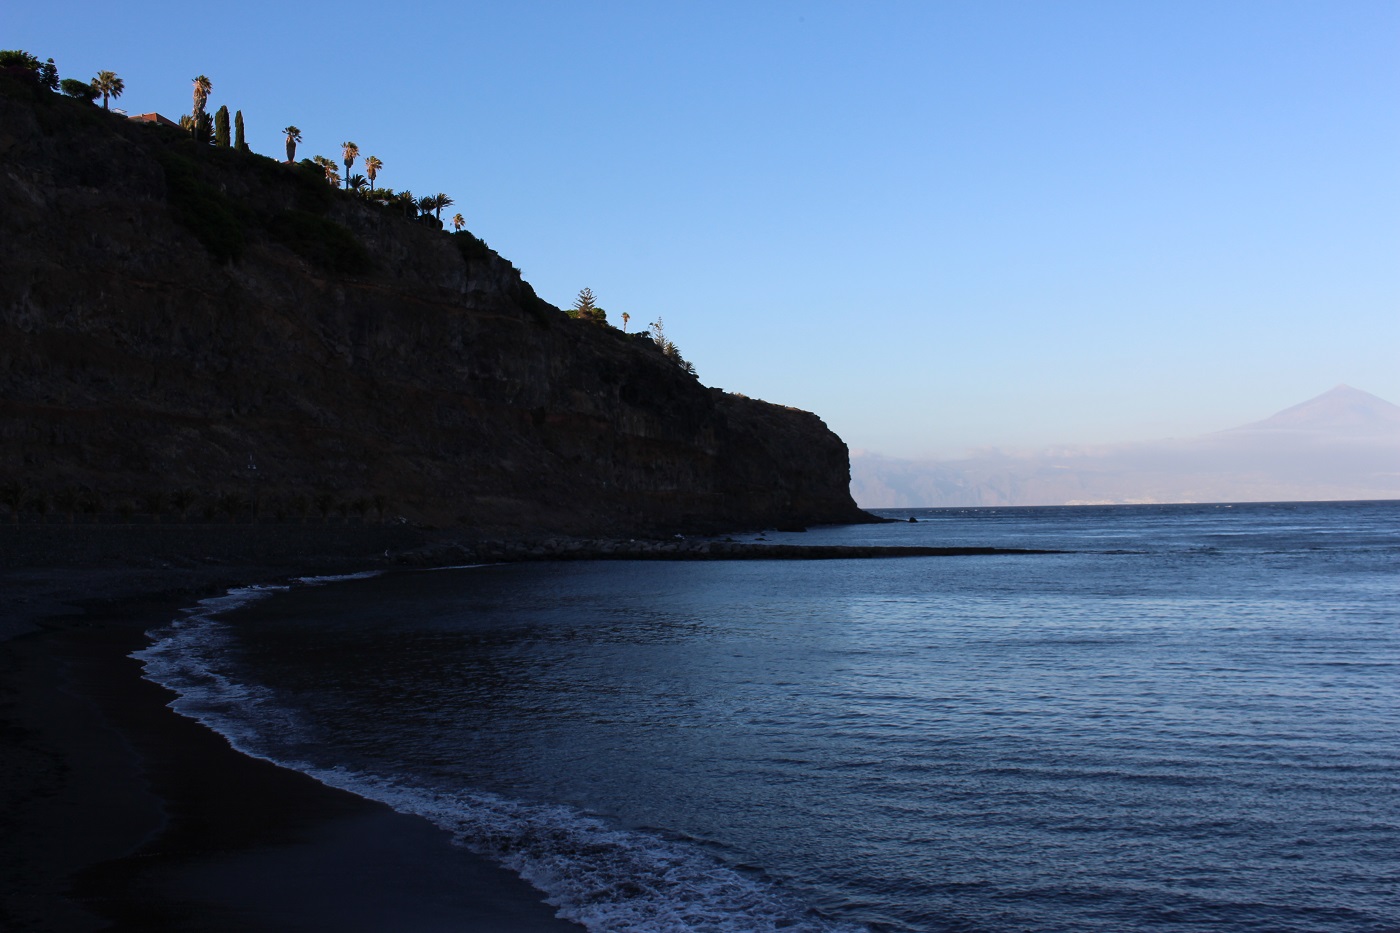 secluded-beach-quava-tenerife-volc-distance